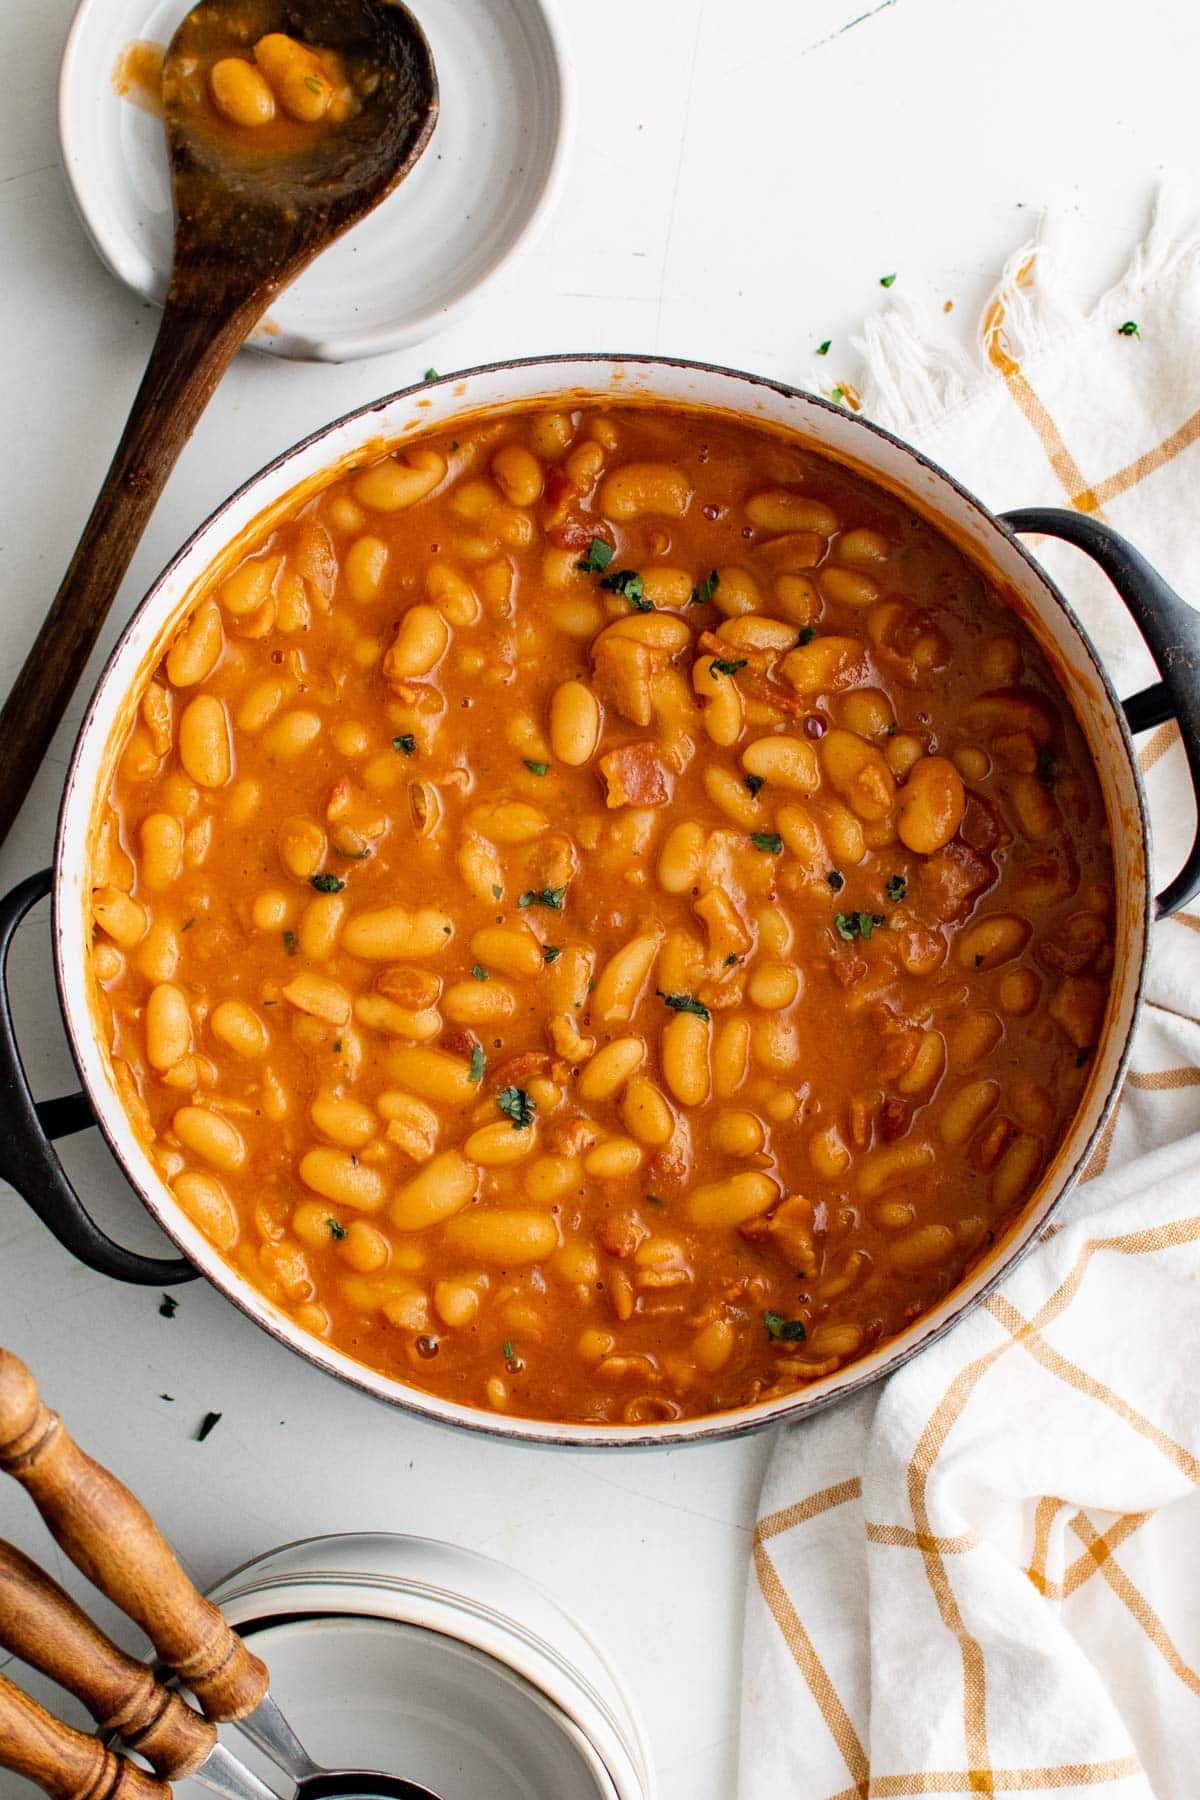 Large pot of homemade pork and beans.